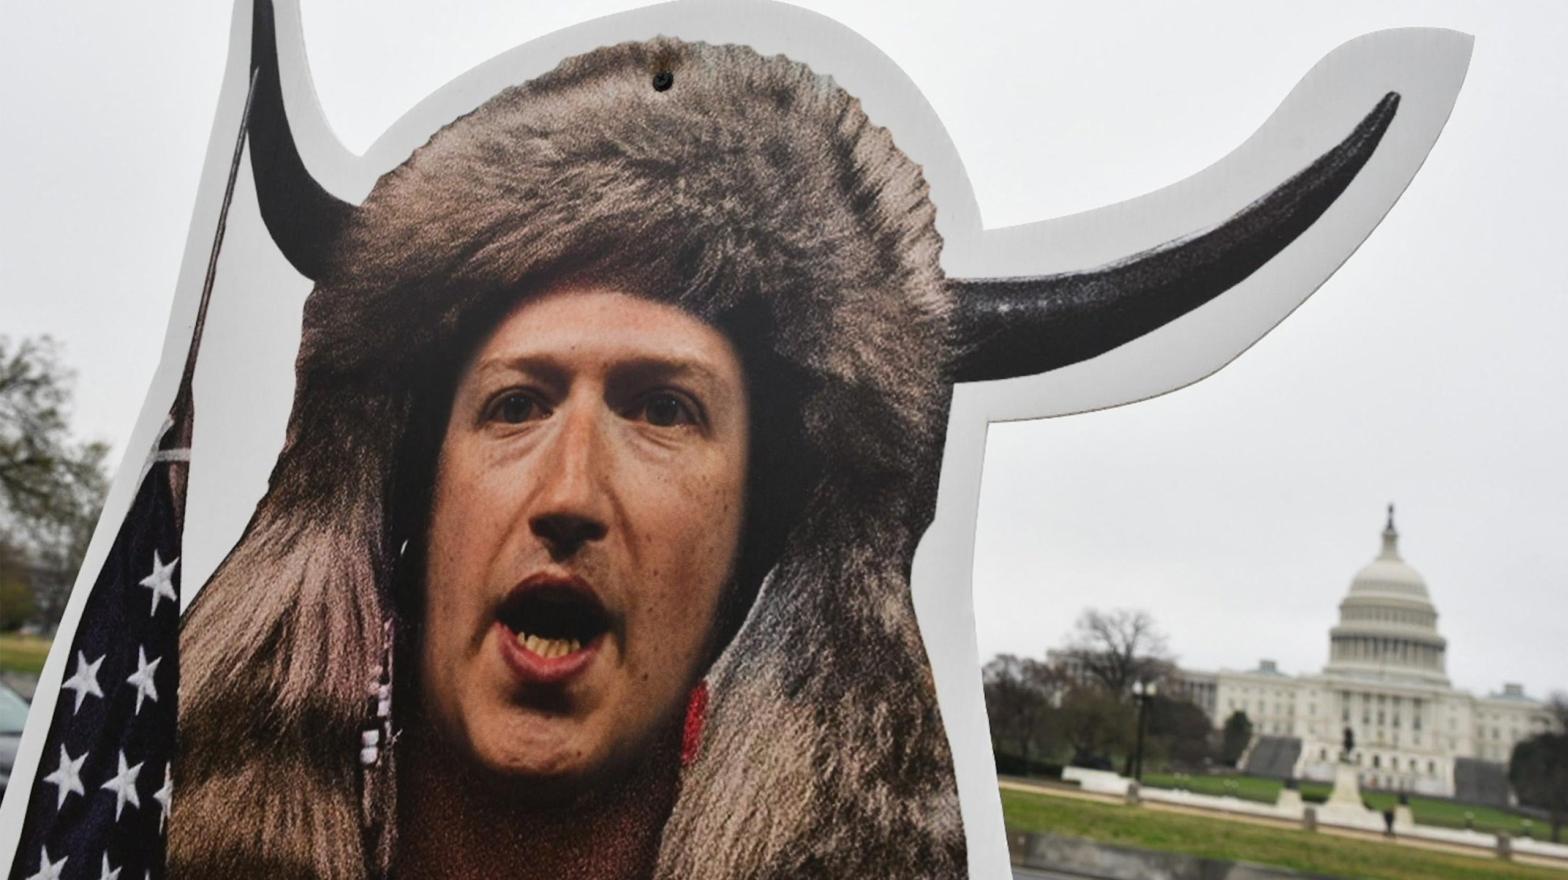 An effigy of Facebook CEO, Mark Zuckerberg, dressed as a January 6, 2021, insurrectionist is placed near the US Capitol in Washington, DC, on March 25, 2021. (Photo: Mandel Ngan, Getty Images)